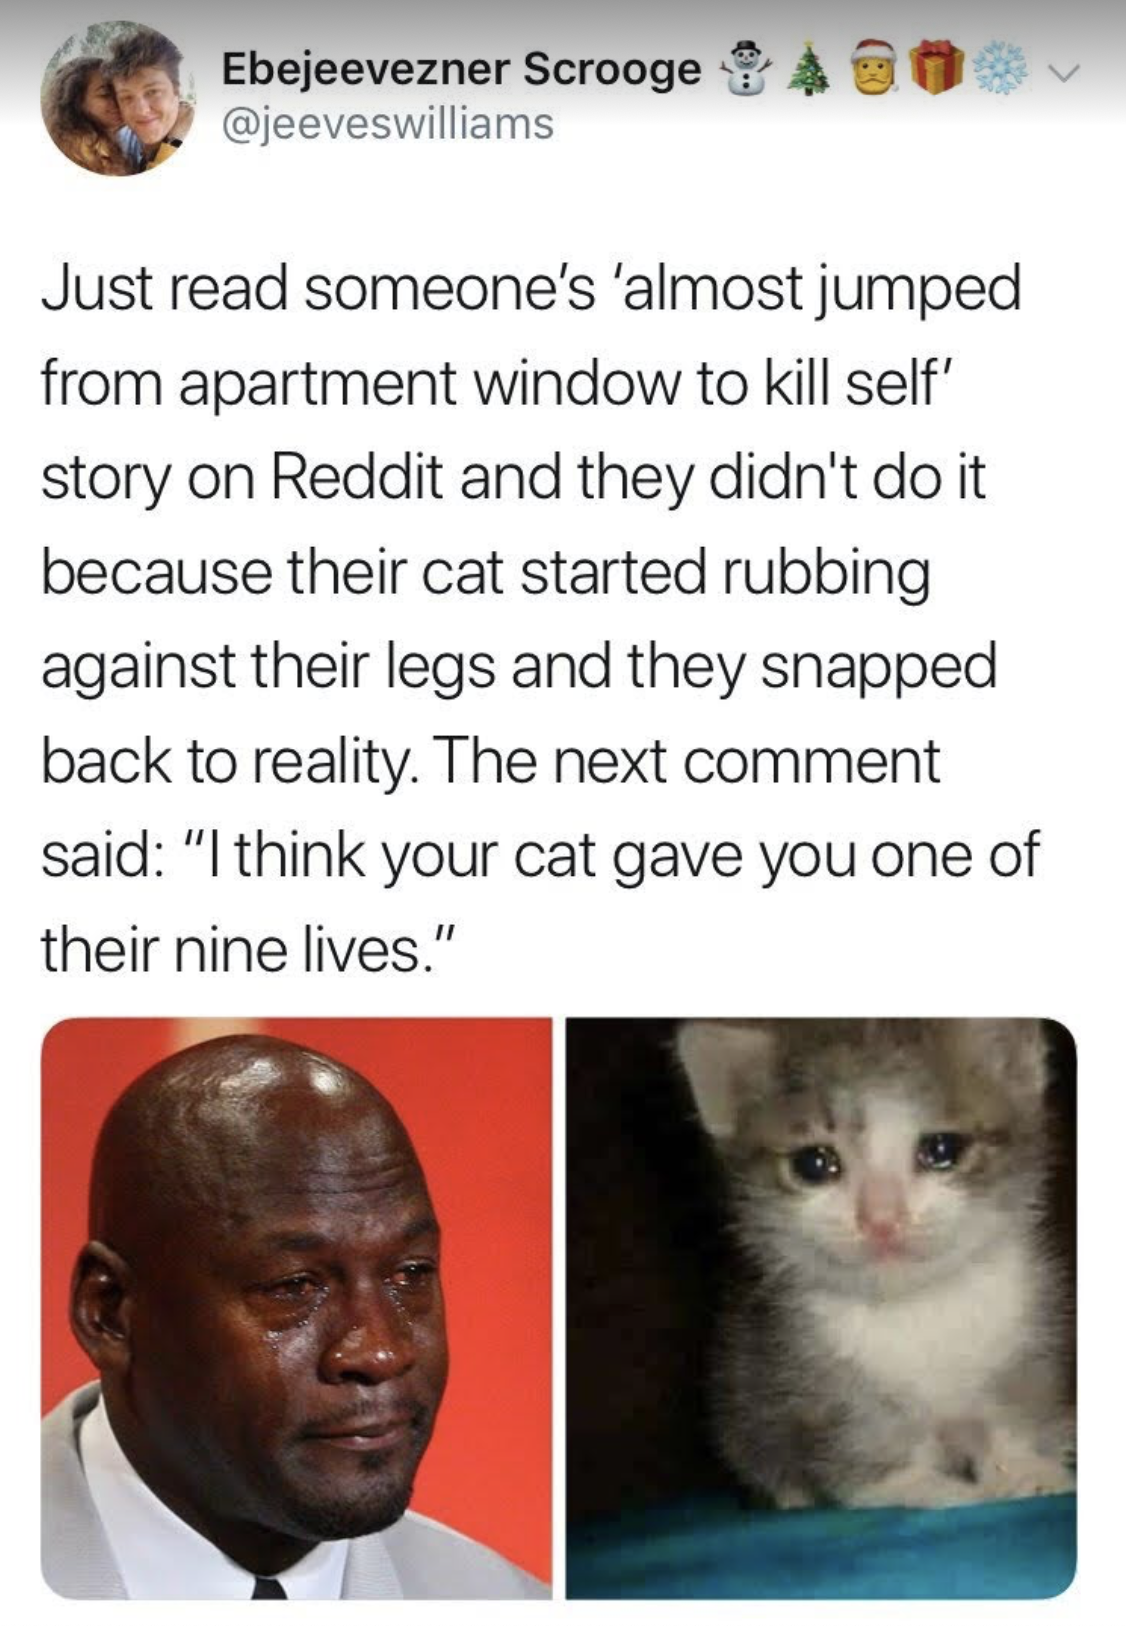 think your cat gave you one - Ebejeevezner Scrooge As Just read someone's 'almost jumped from apartment window to kill self' story on Reddit and they didn't do it because their cat started rubbing against their legs and they snapped back to reality. The n